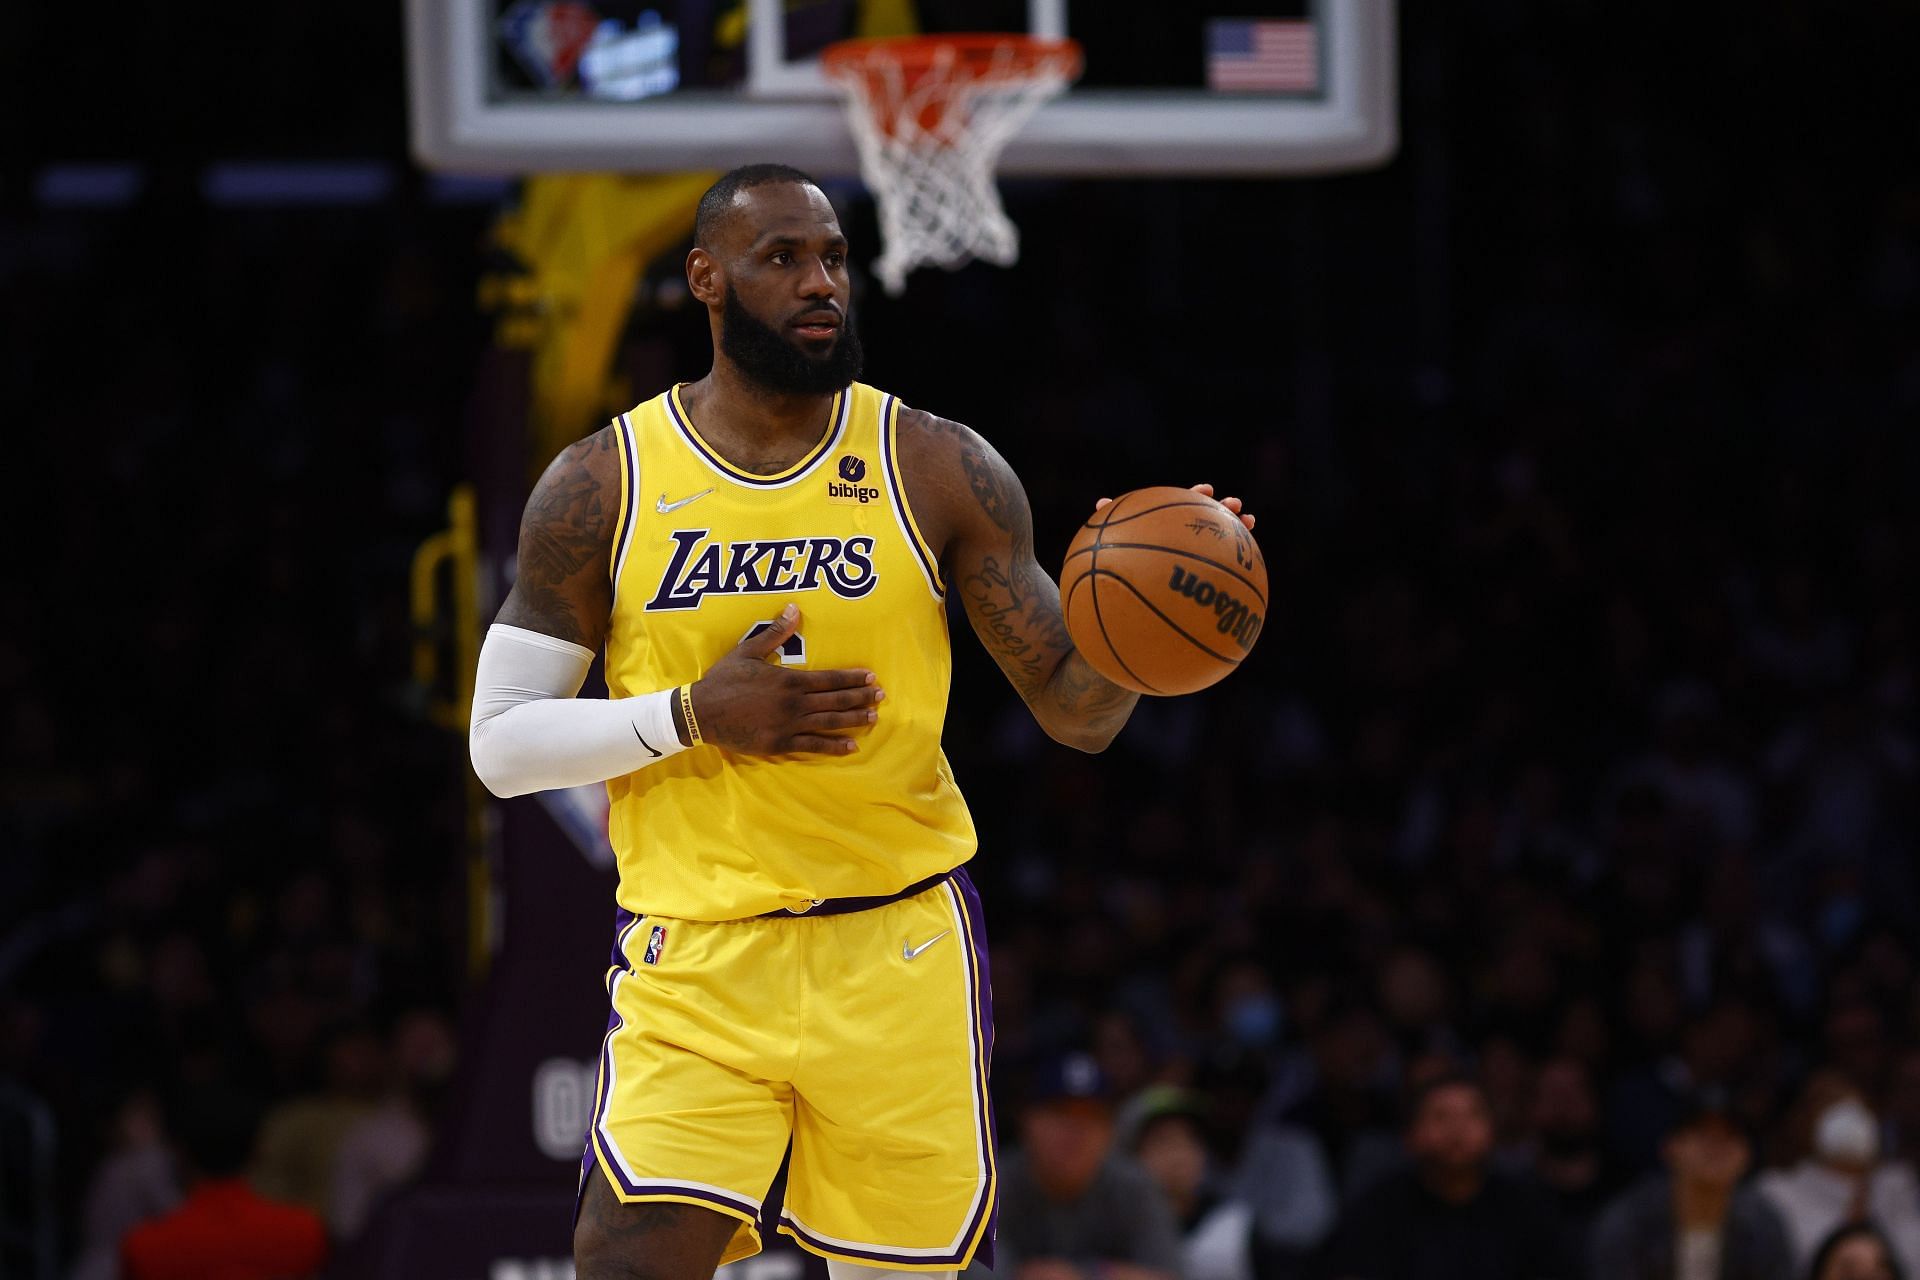 LeBron James #6 of the Los Angeles Lakers